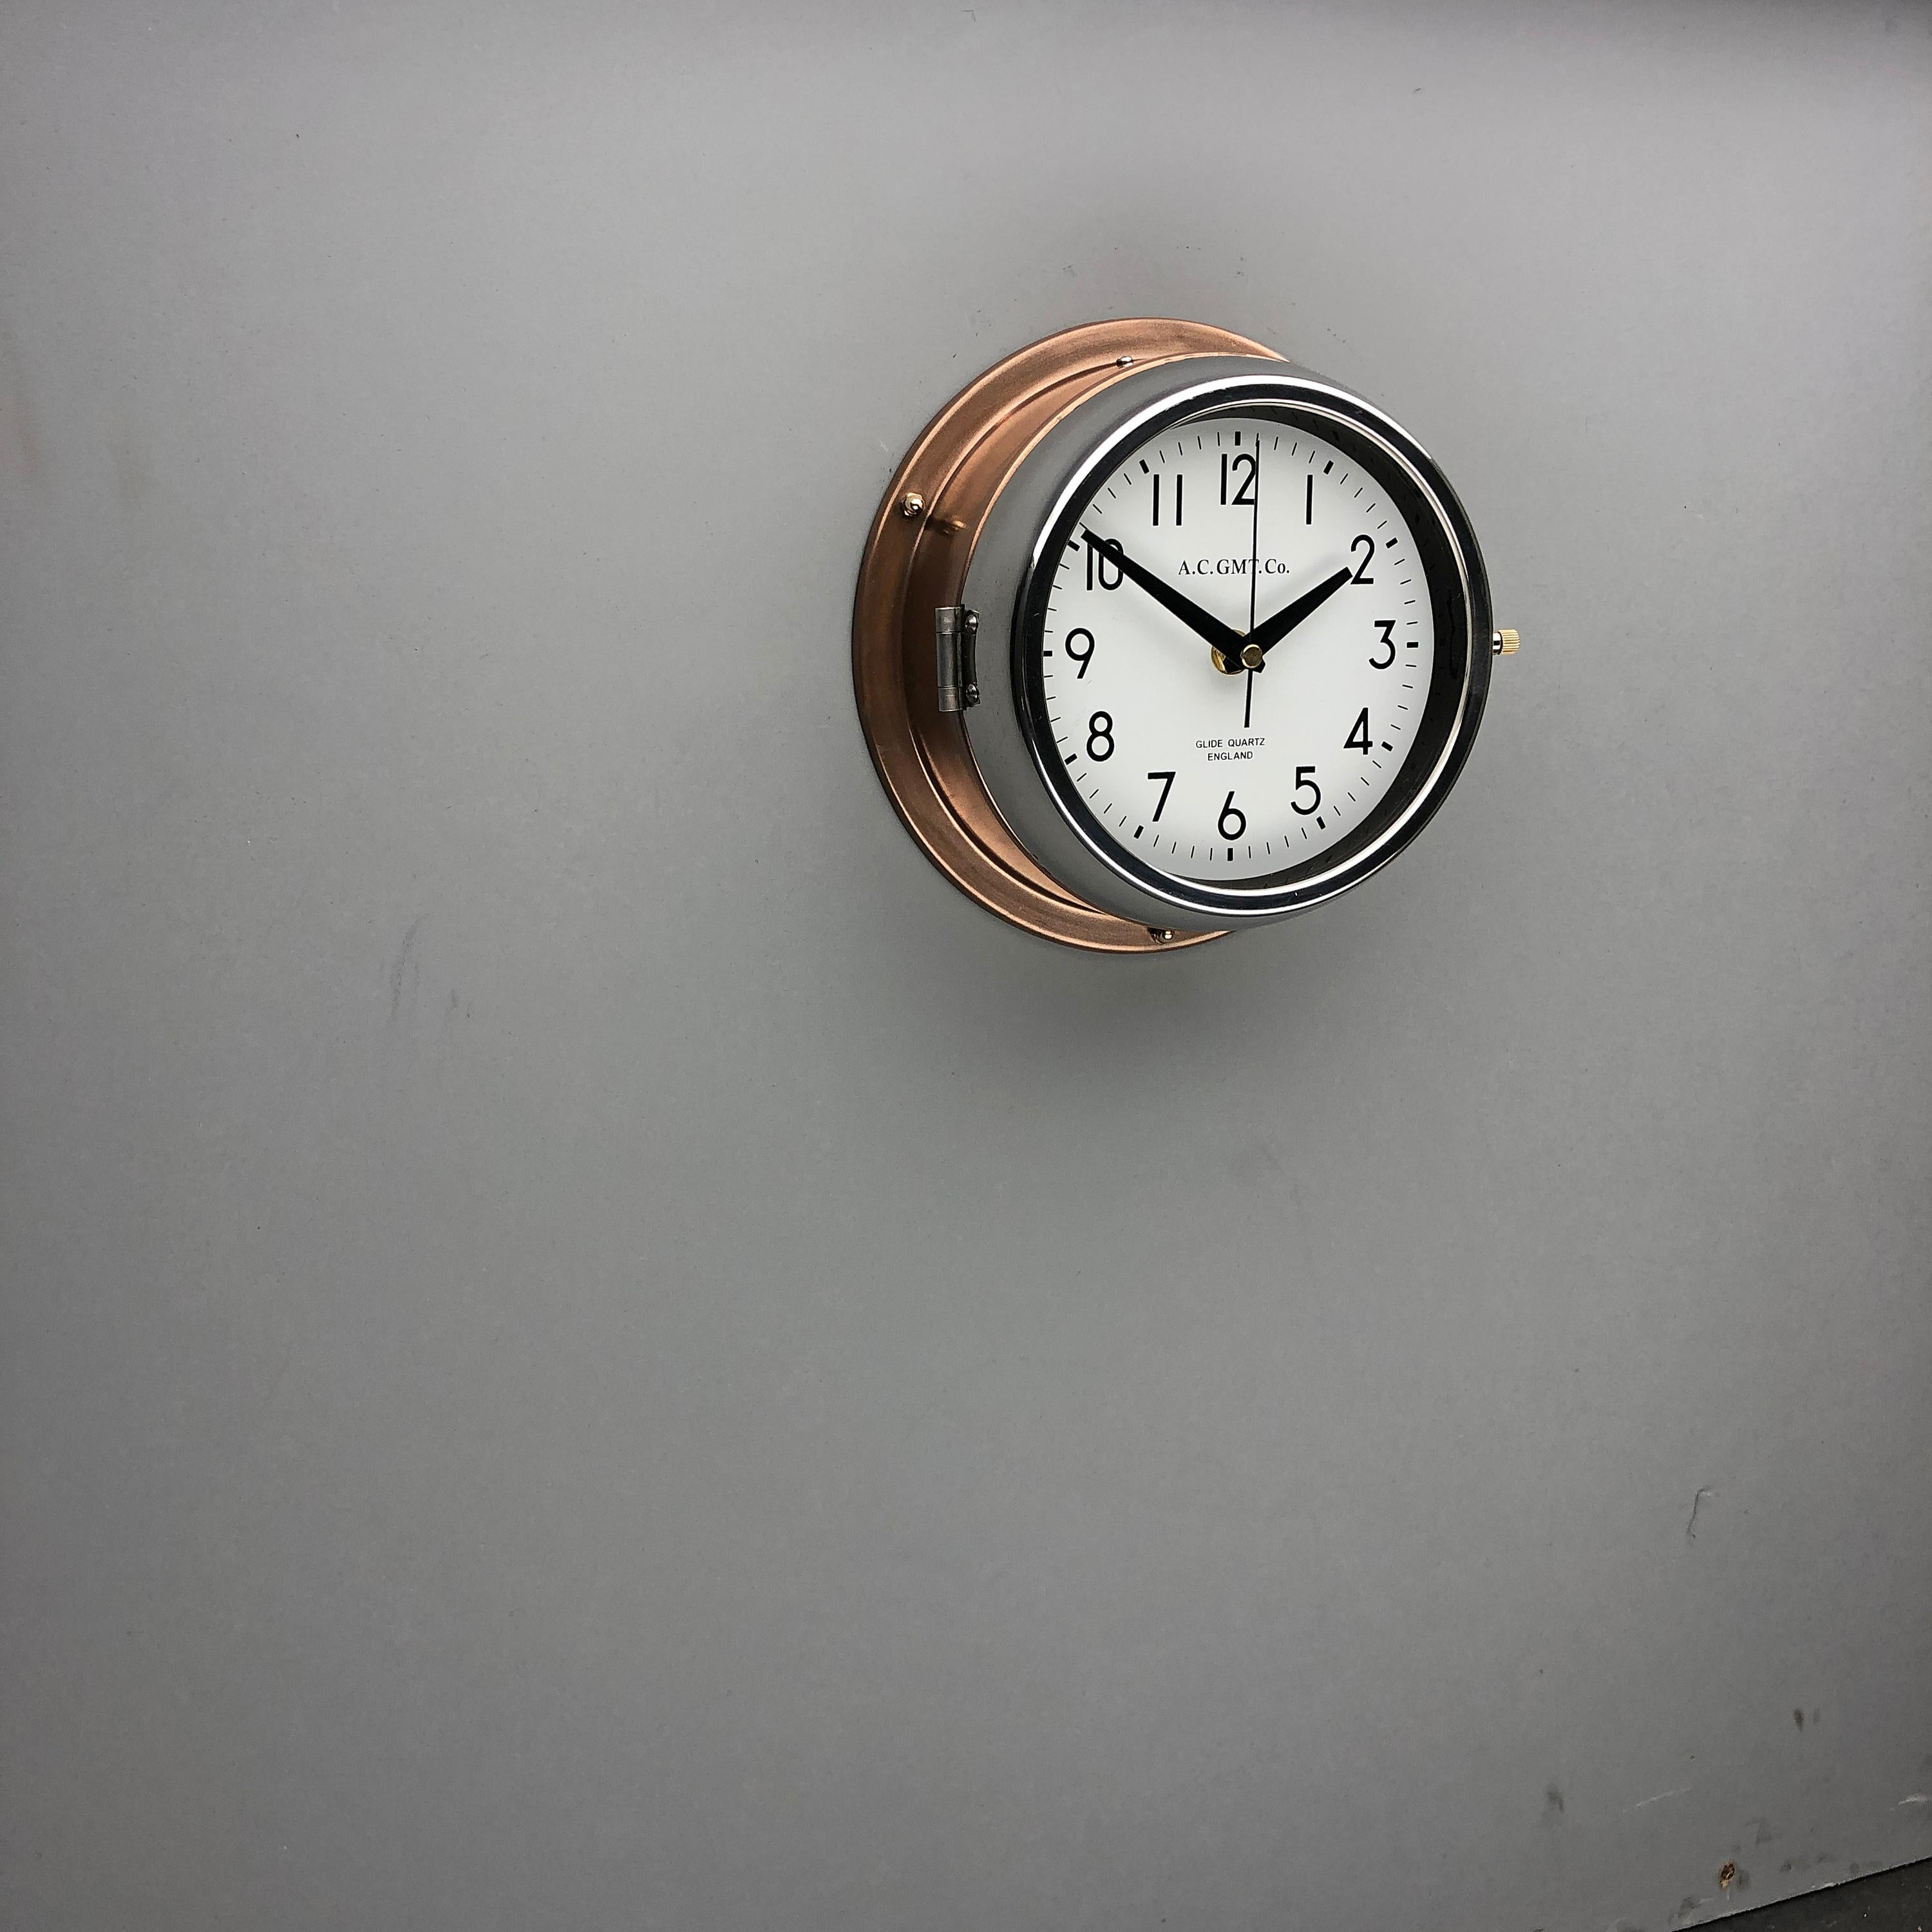 1970s British Bronze and Chrome AC GMT Co. Industrial Wall Clock White Dial 5